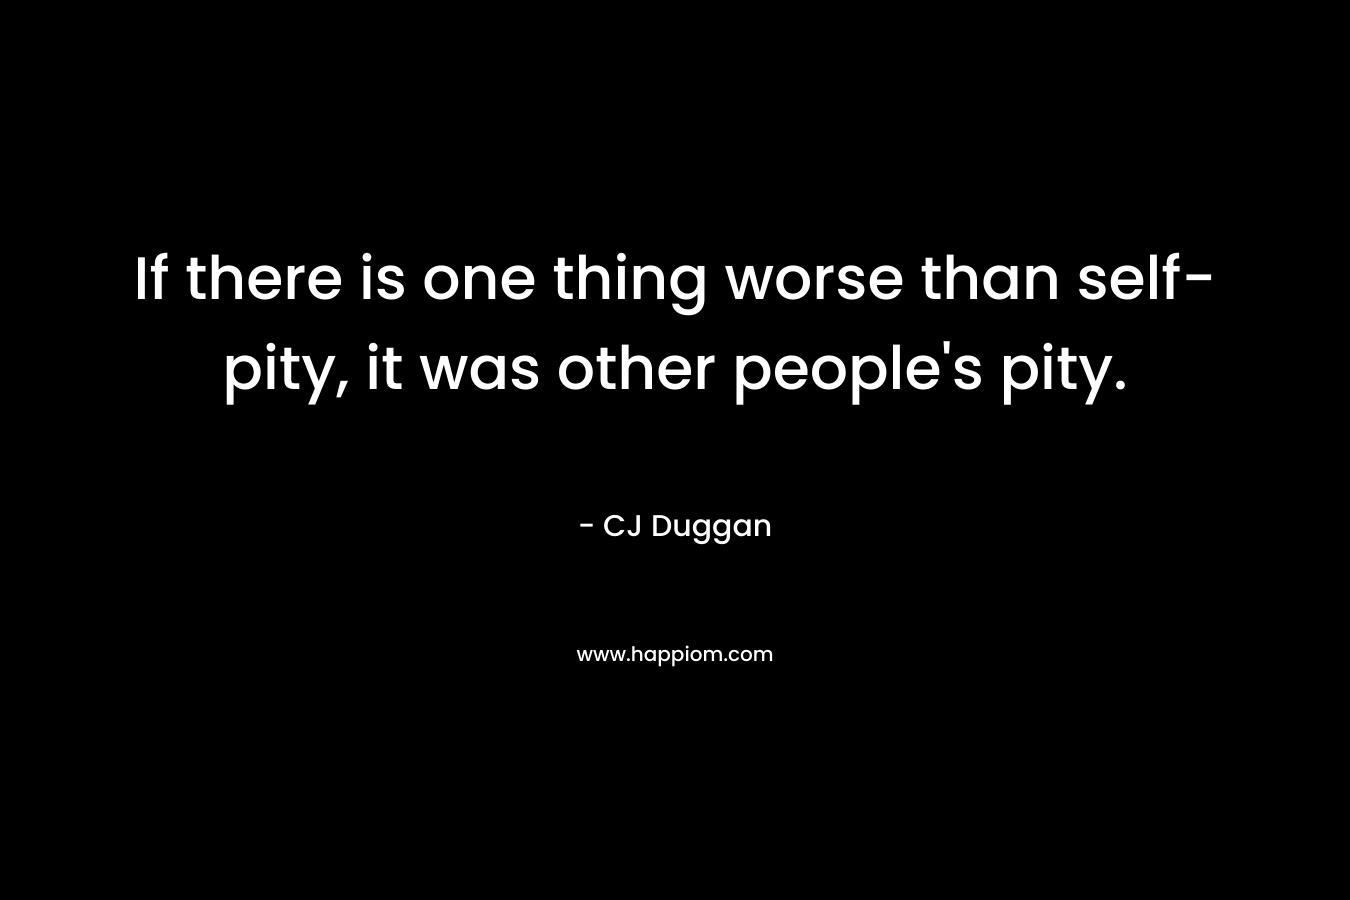 If there is one thing worse than self-pity, it was other people's pity.